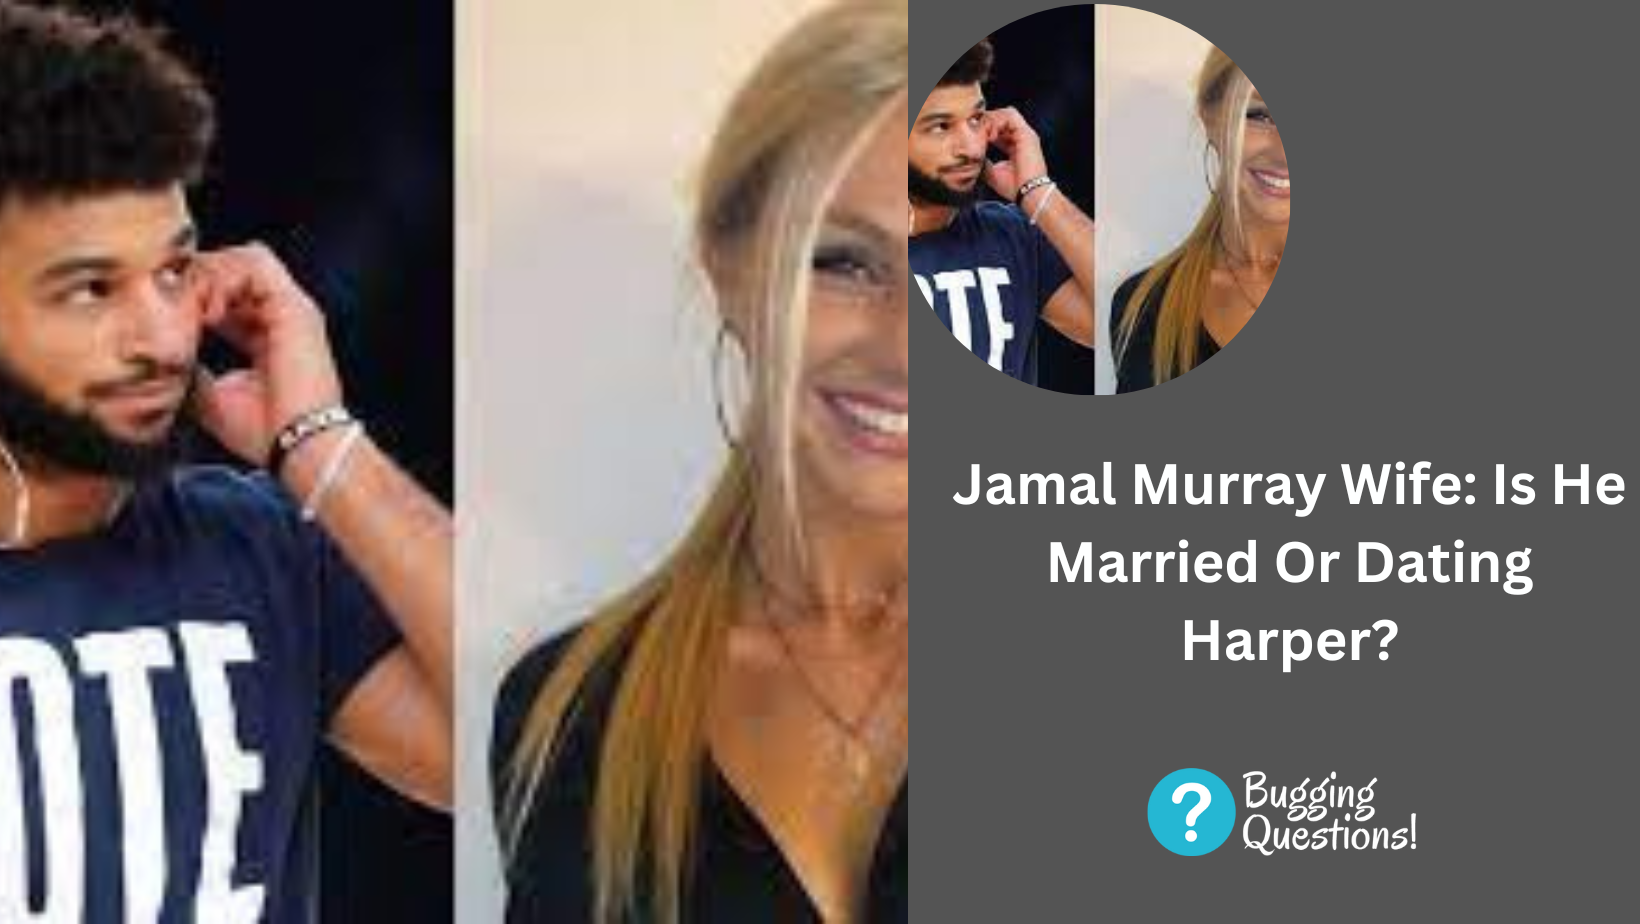 Jamal Murray Wife: Is He Married Or Dating Harper?